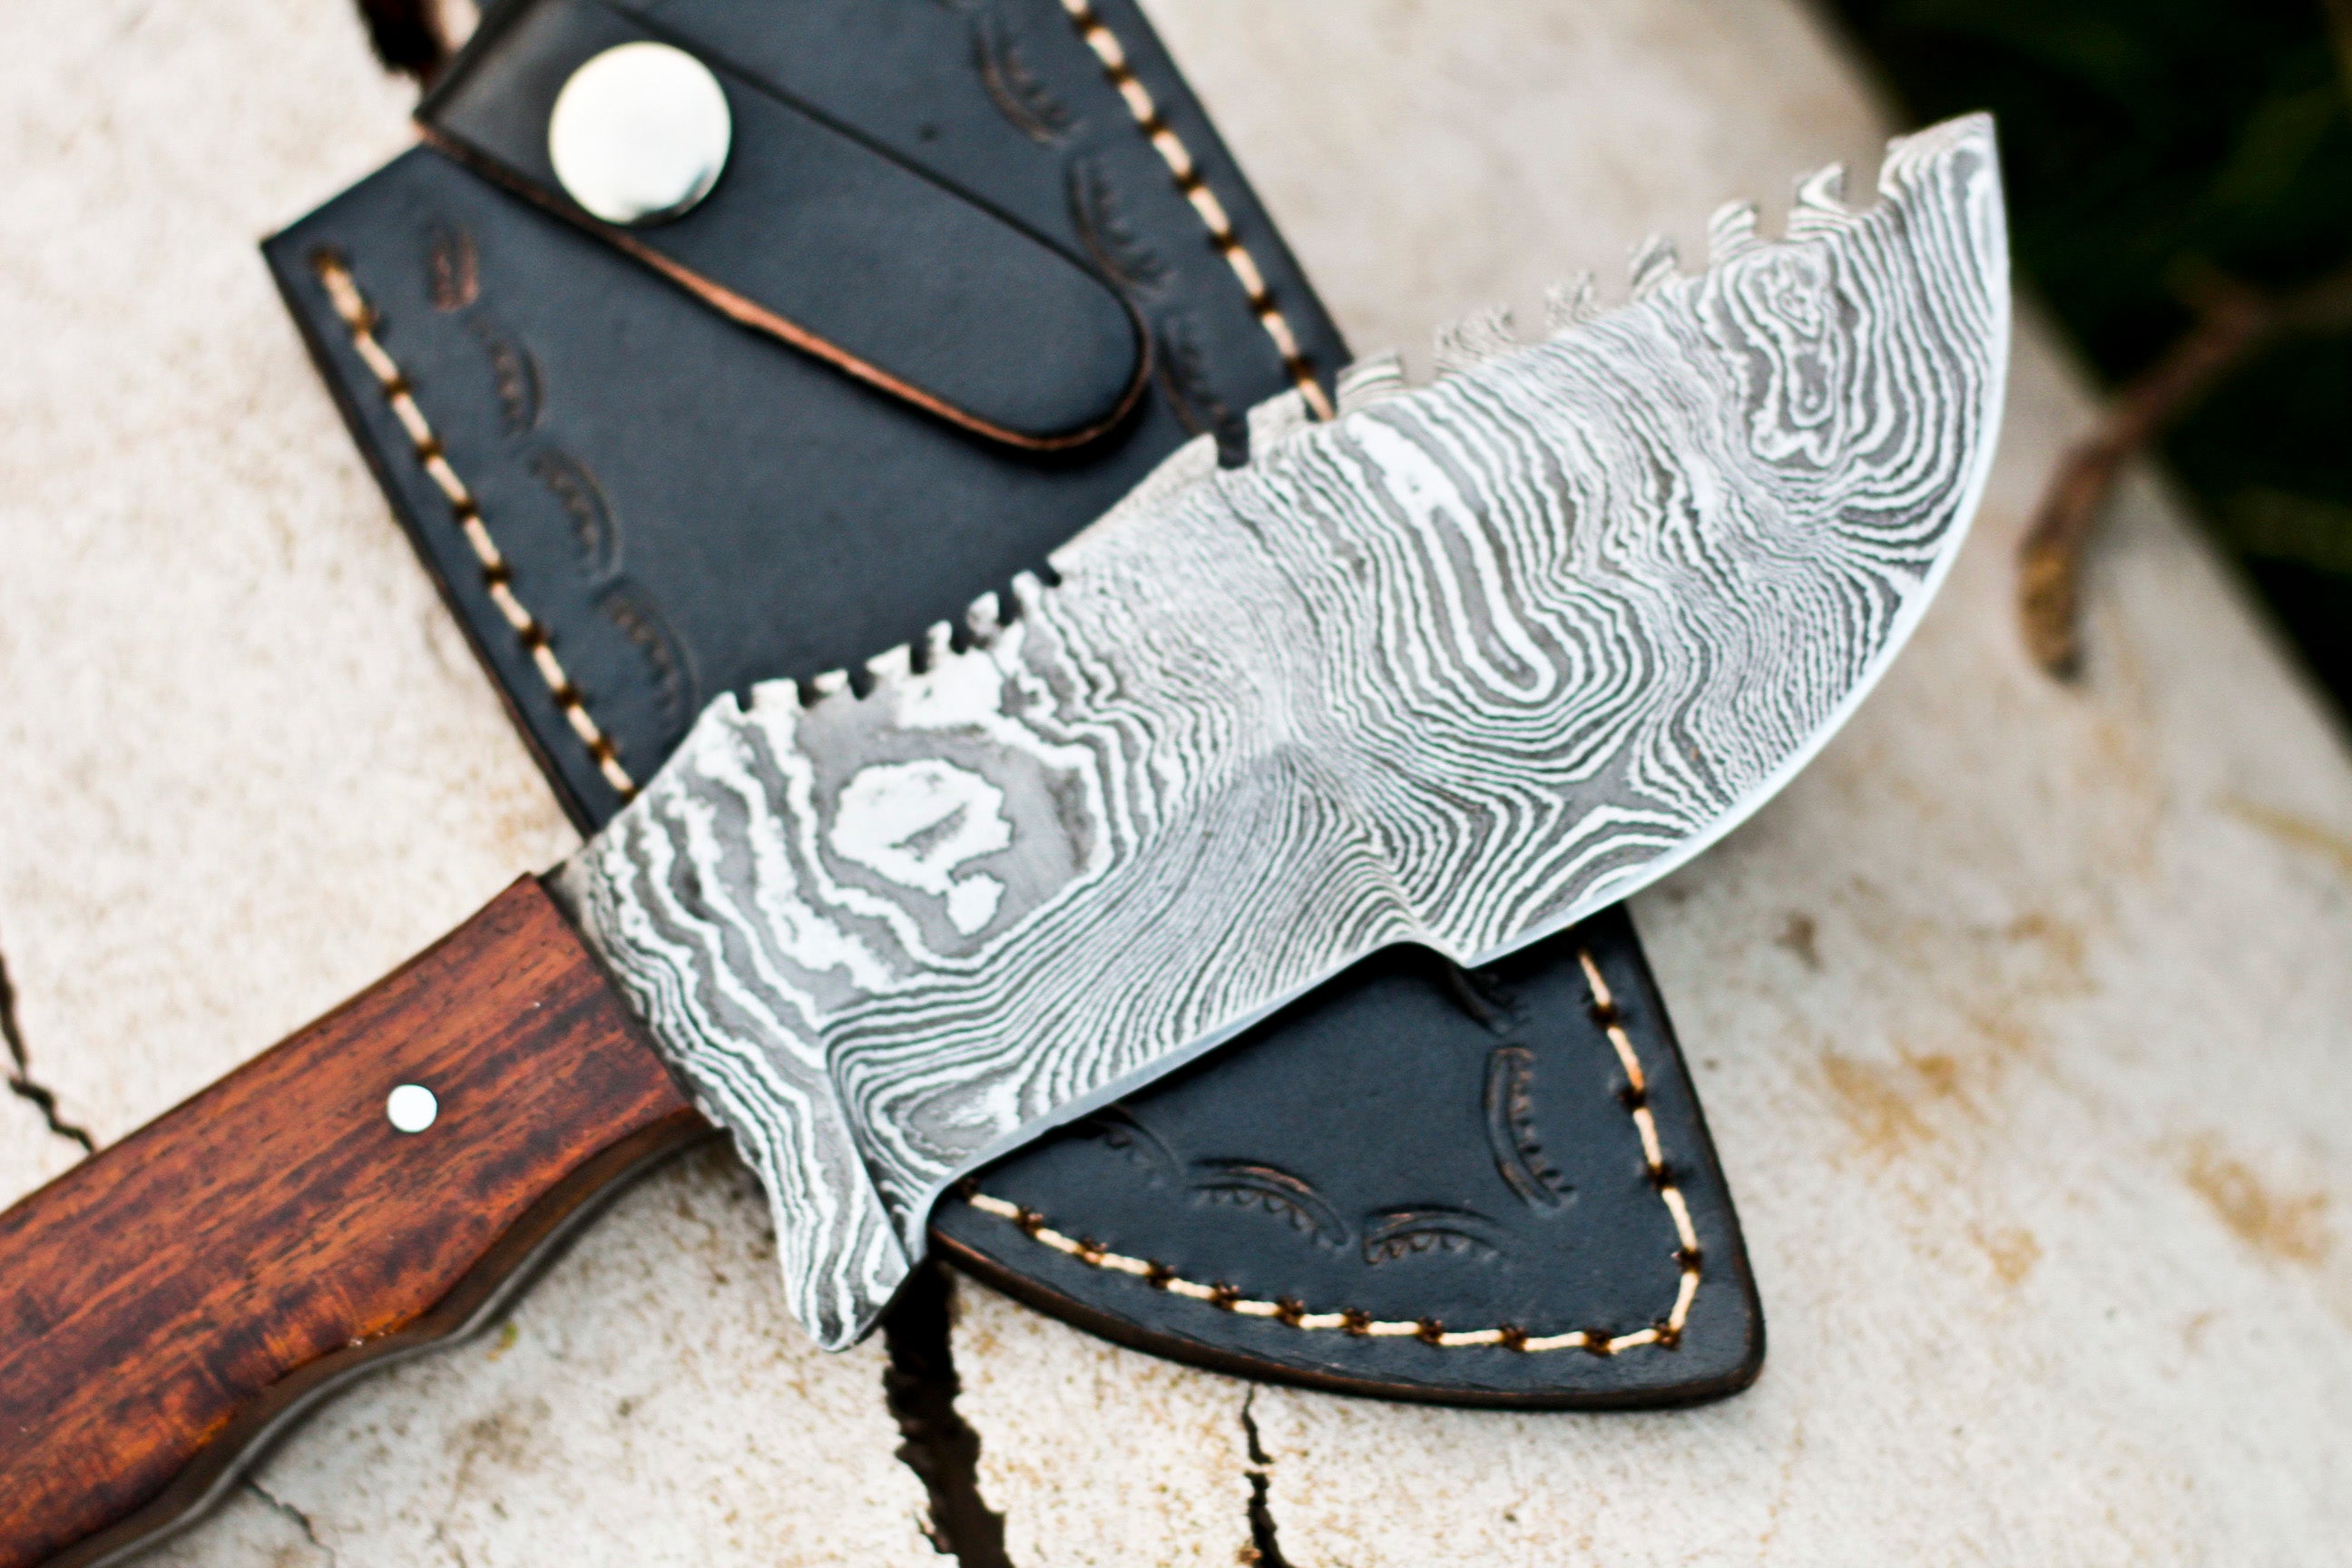 <h3>Tracker Knife - Hand Forged Damascus Steel Hunting Tracker Wood Handle</h3>